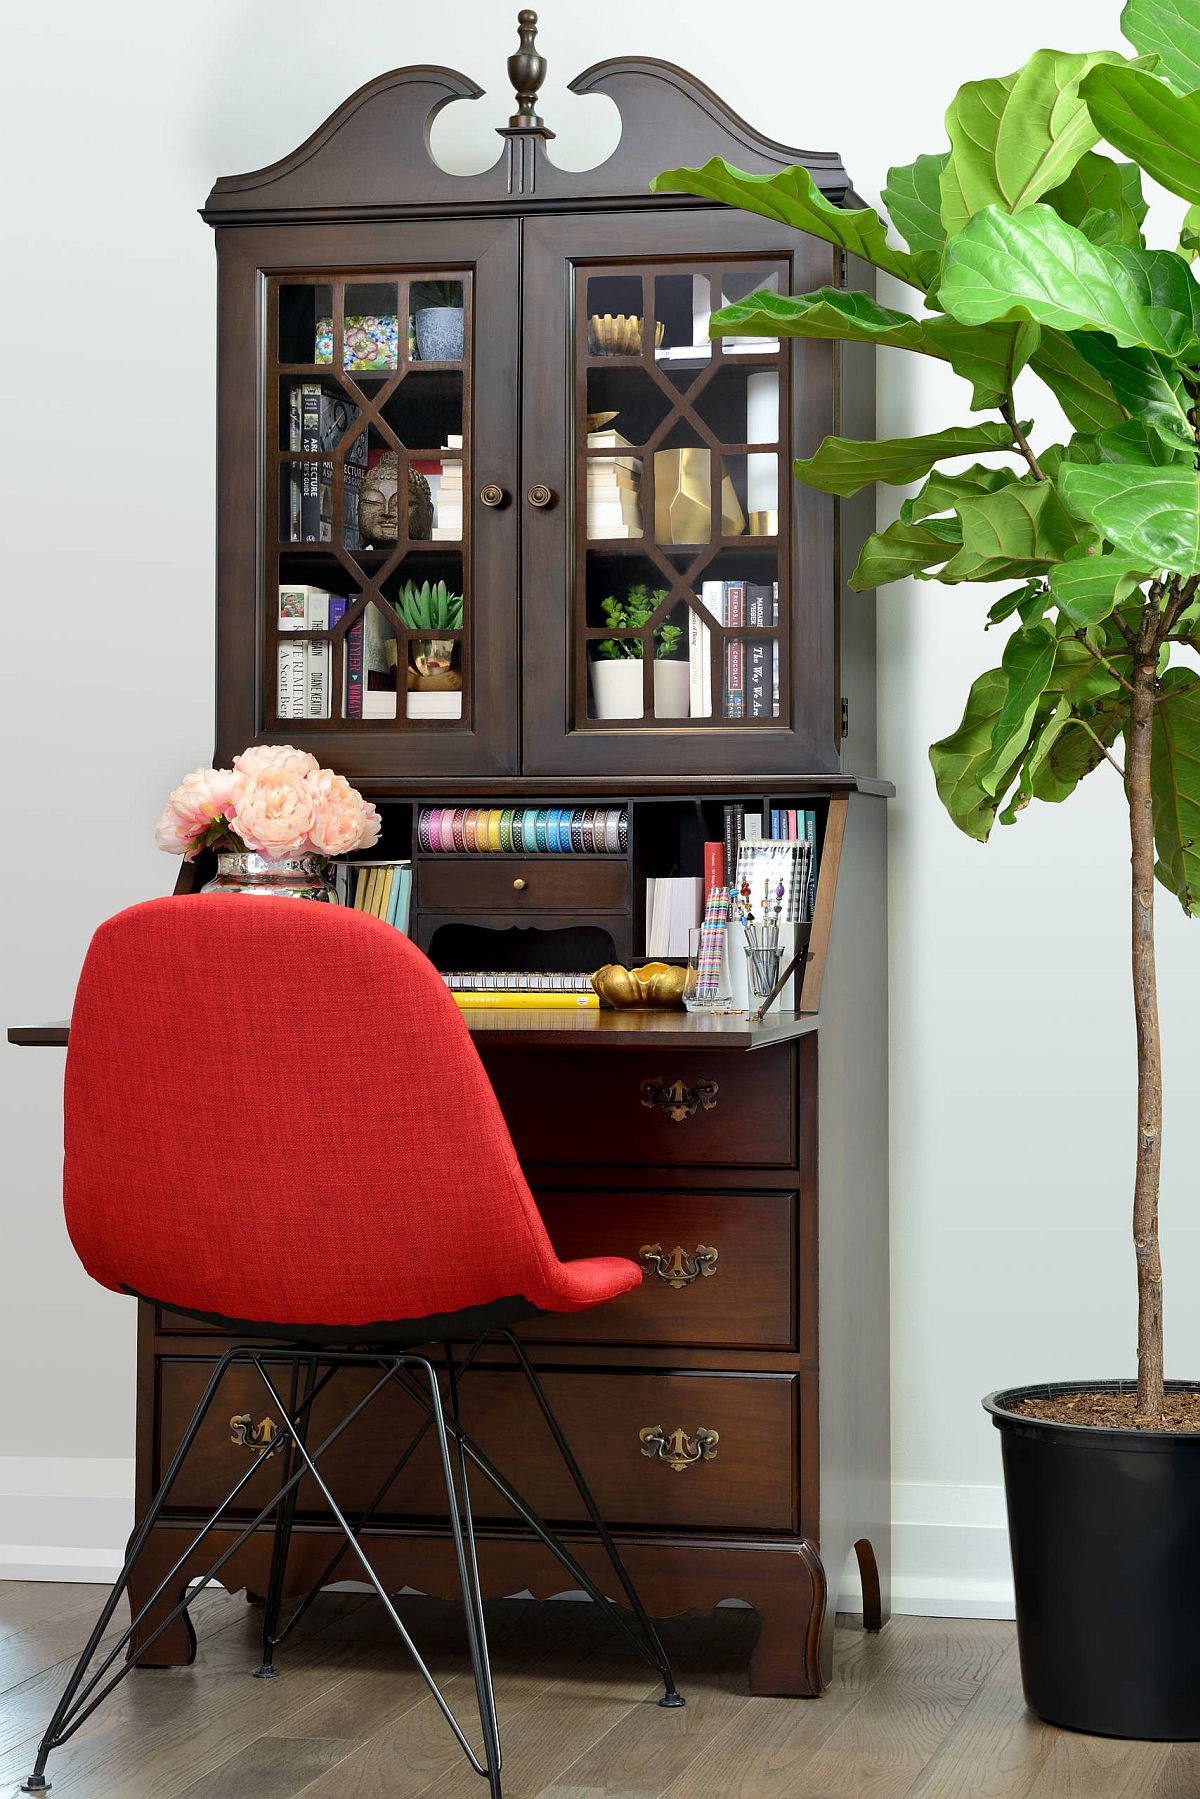 Freestanding-wooden-desk-along-with-storage-space-creates-this-fabulous-little-crafing-zone-34949